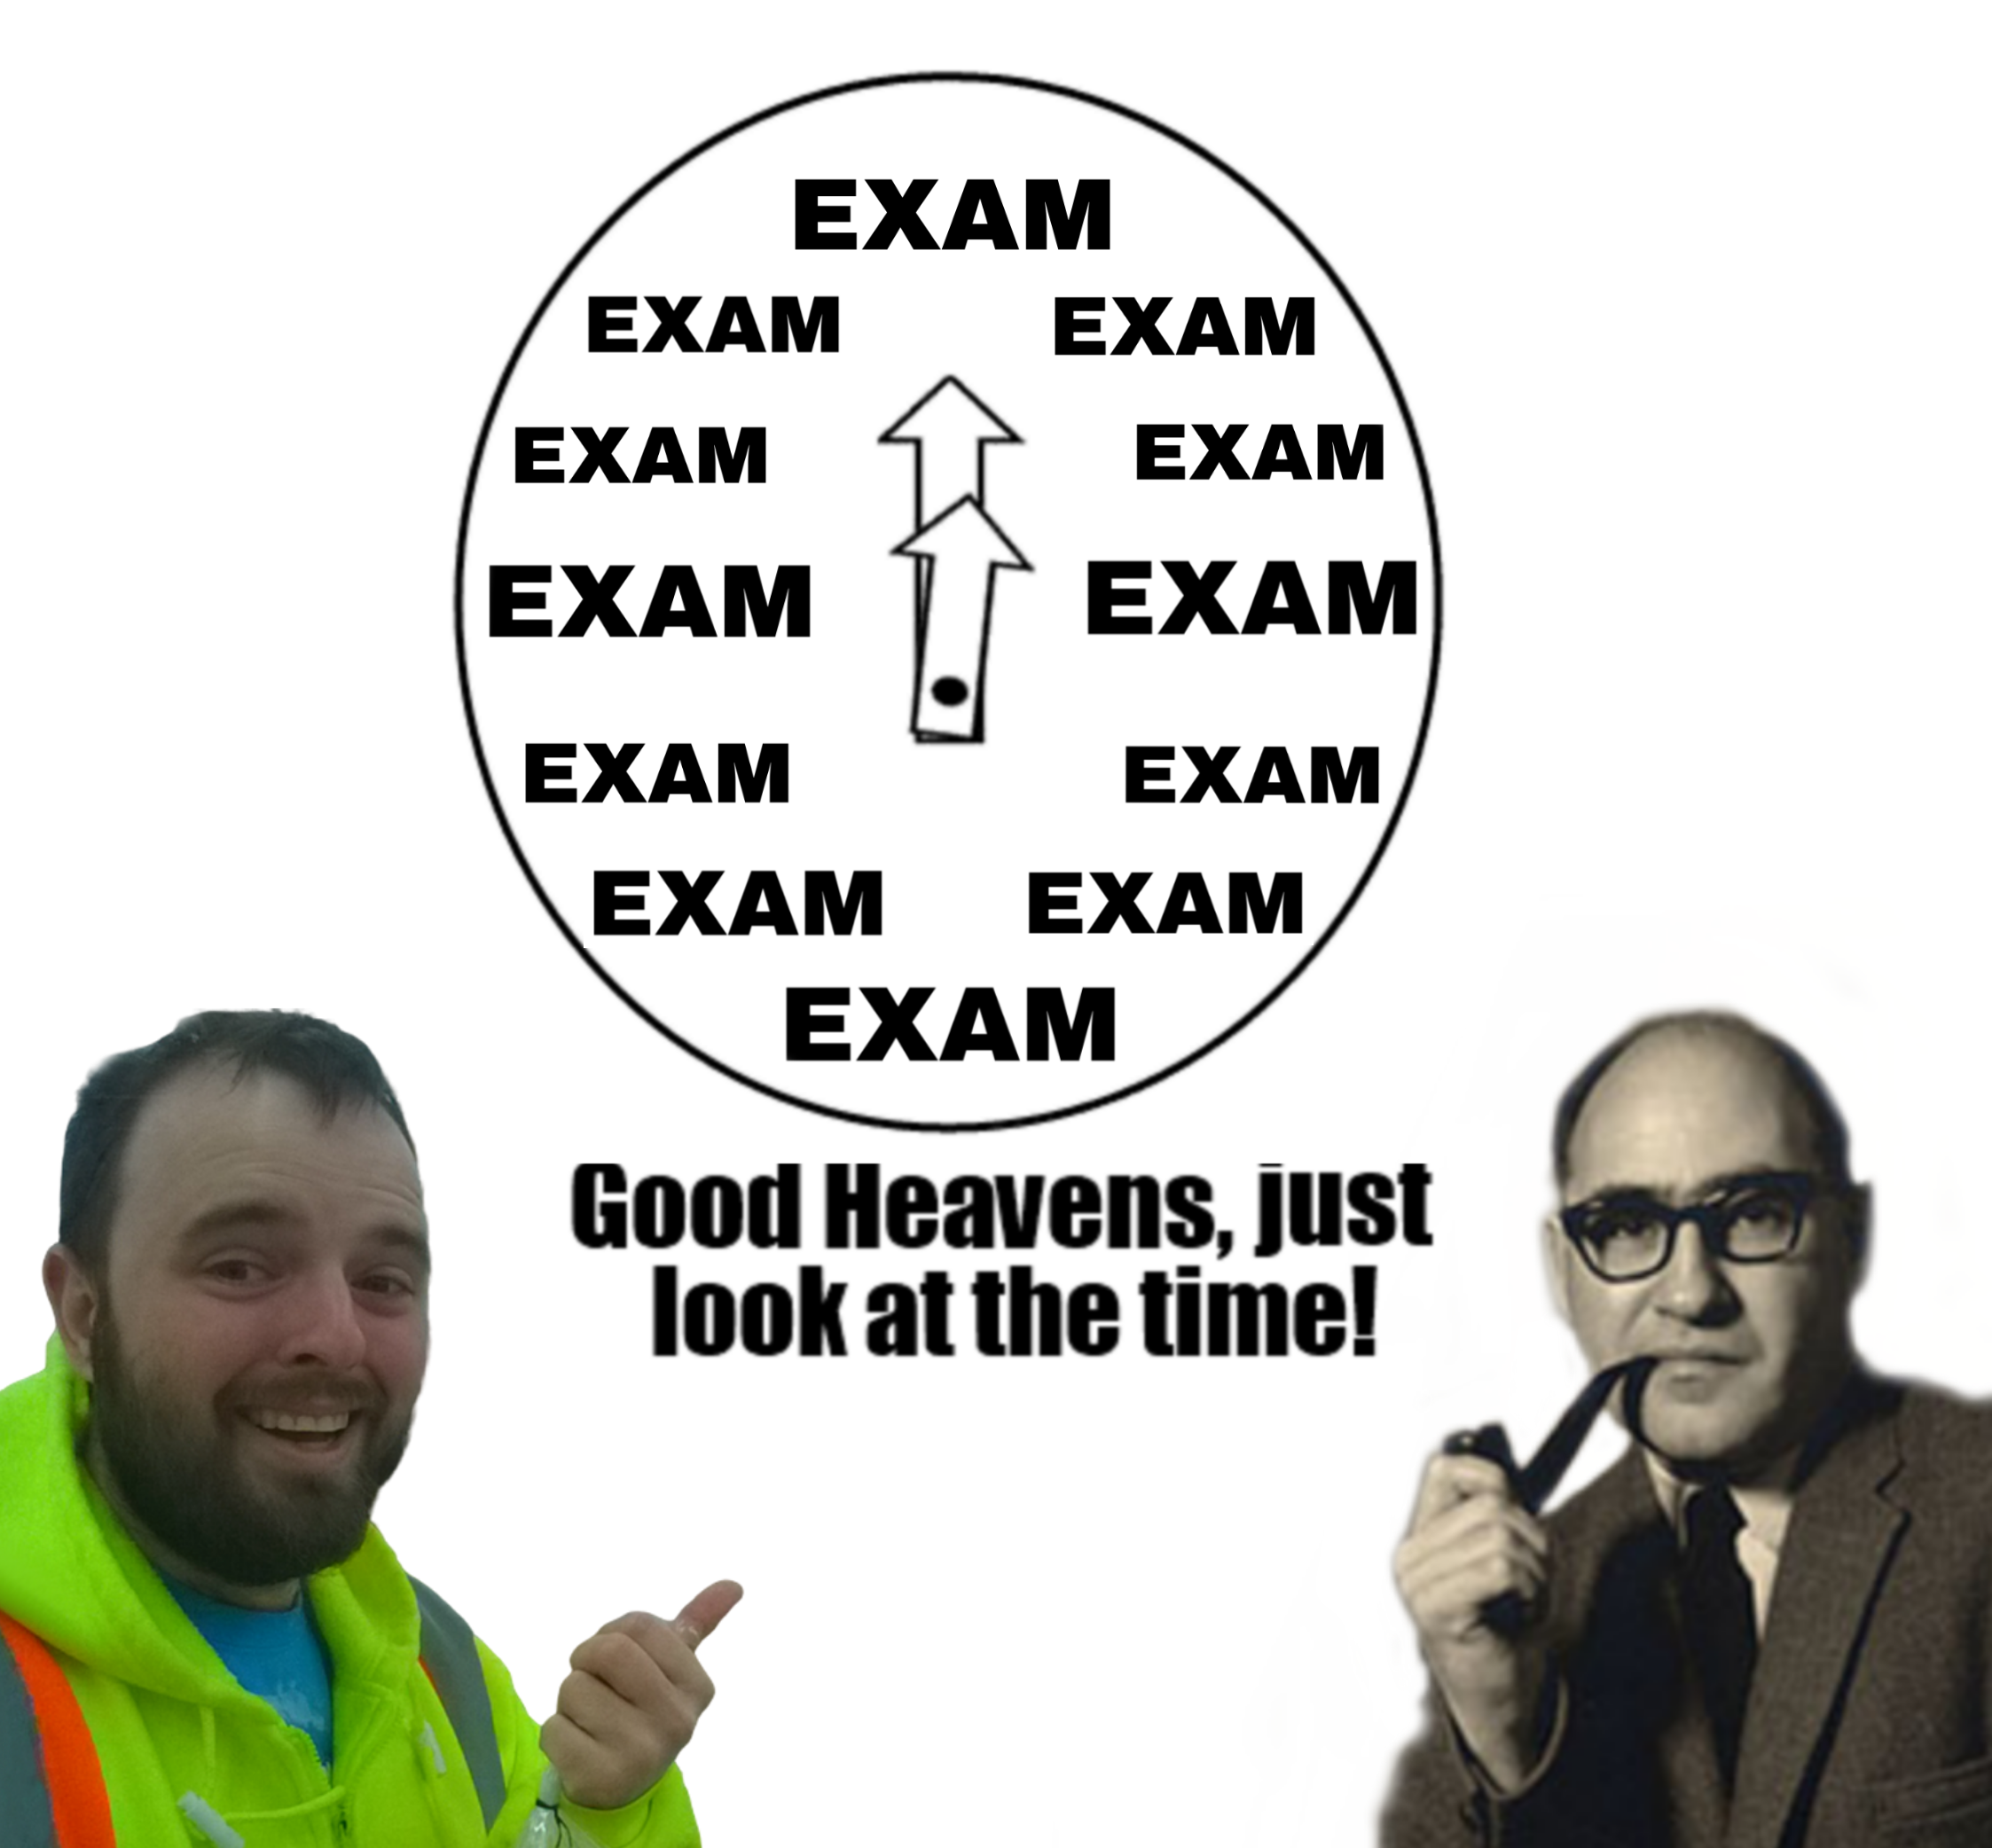 6 hours left of the April meme exam! Take the last chance of doing it. Questions in comments